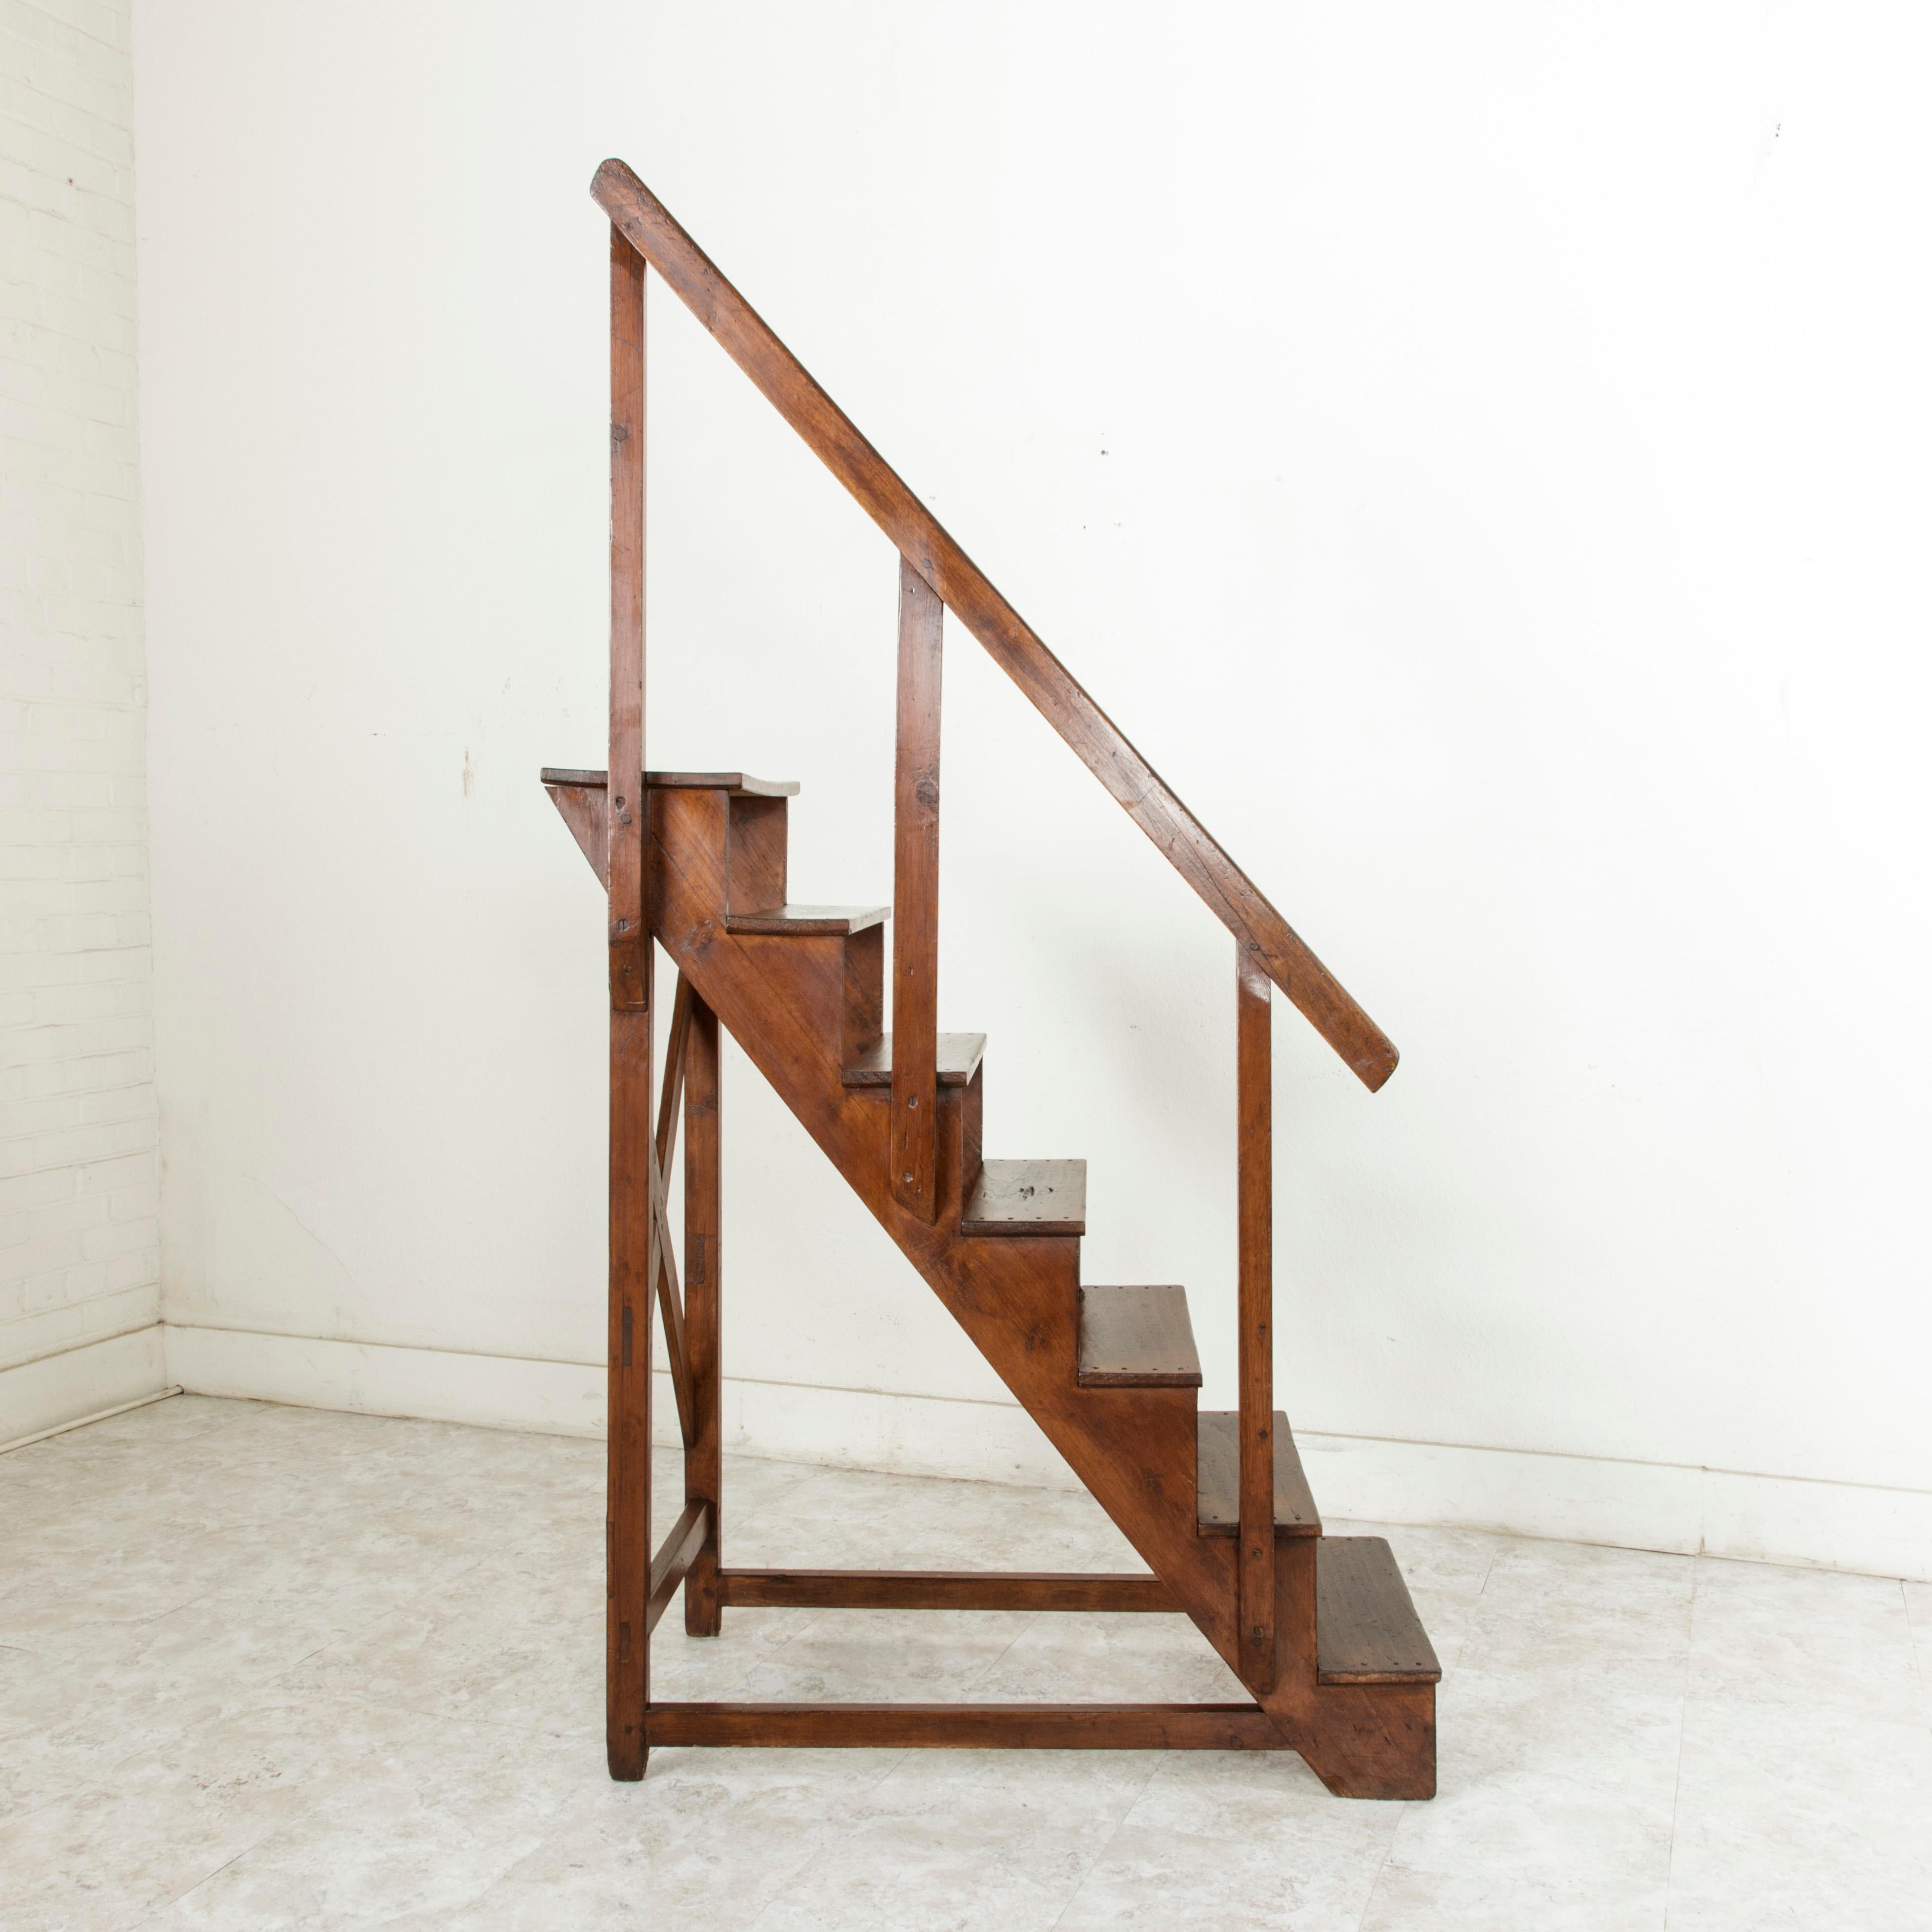 This handsome hand pegged French library ladder from the late nineteenth century is constructed of beech wood and features a hand rail on the left side, providing stability when climbing for hard-to-reach books. With seven steps that could also act